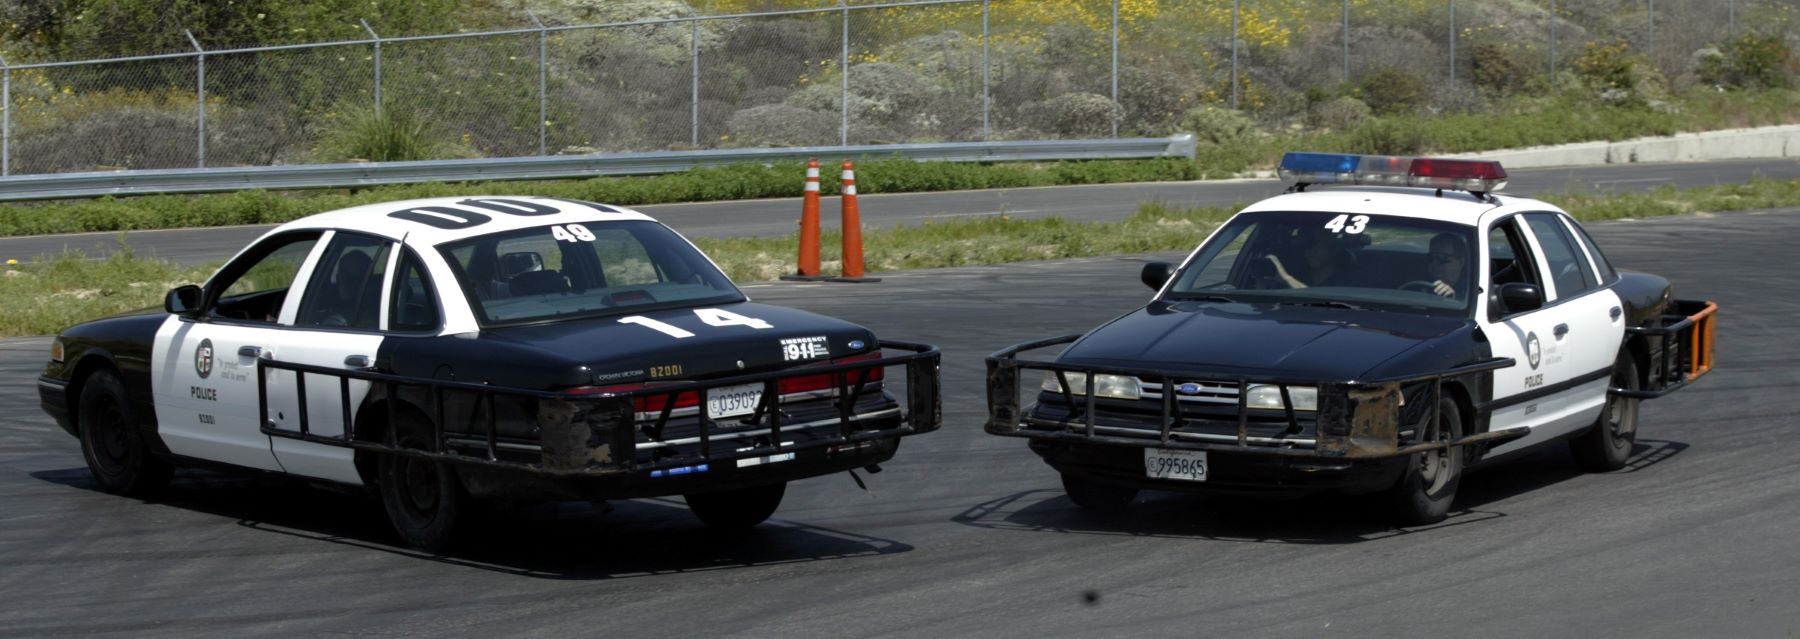 A police demonstration of the PIT maneuver by the LAPD at the Edward Davis Training Center